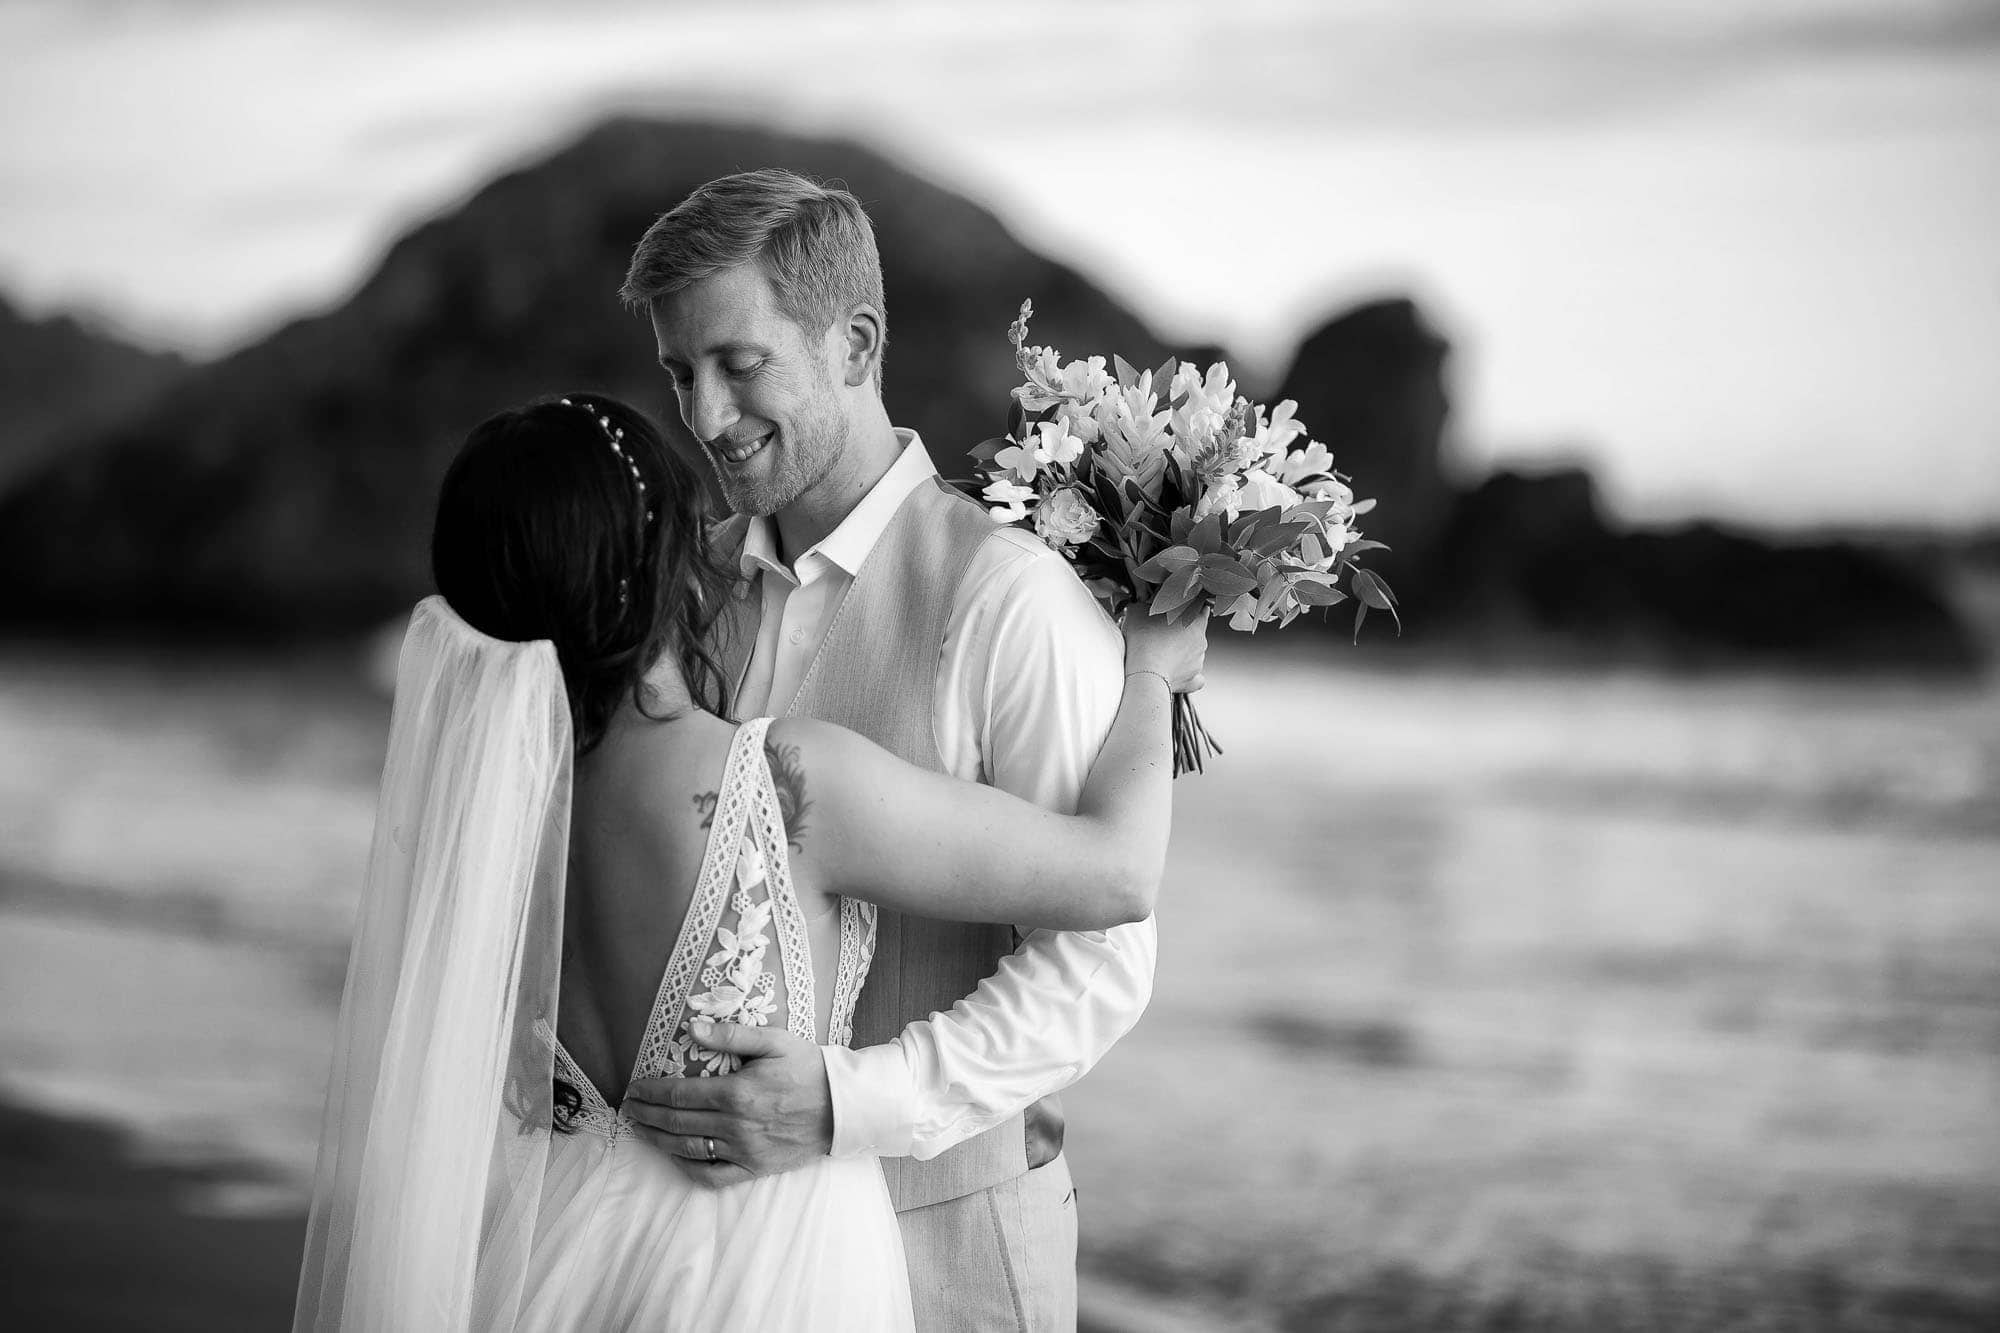 the bride and groom on the beach after their small wedding in Costa Rica